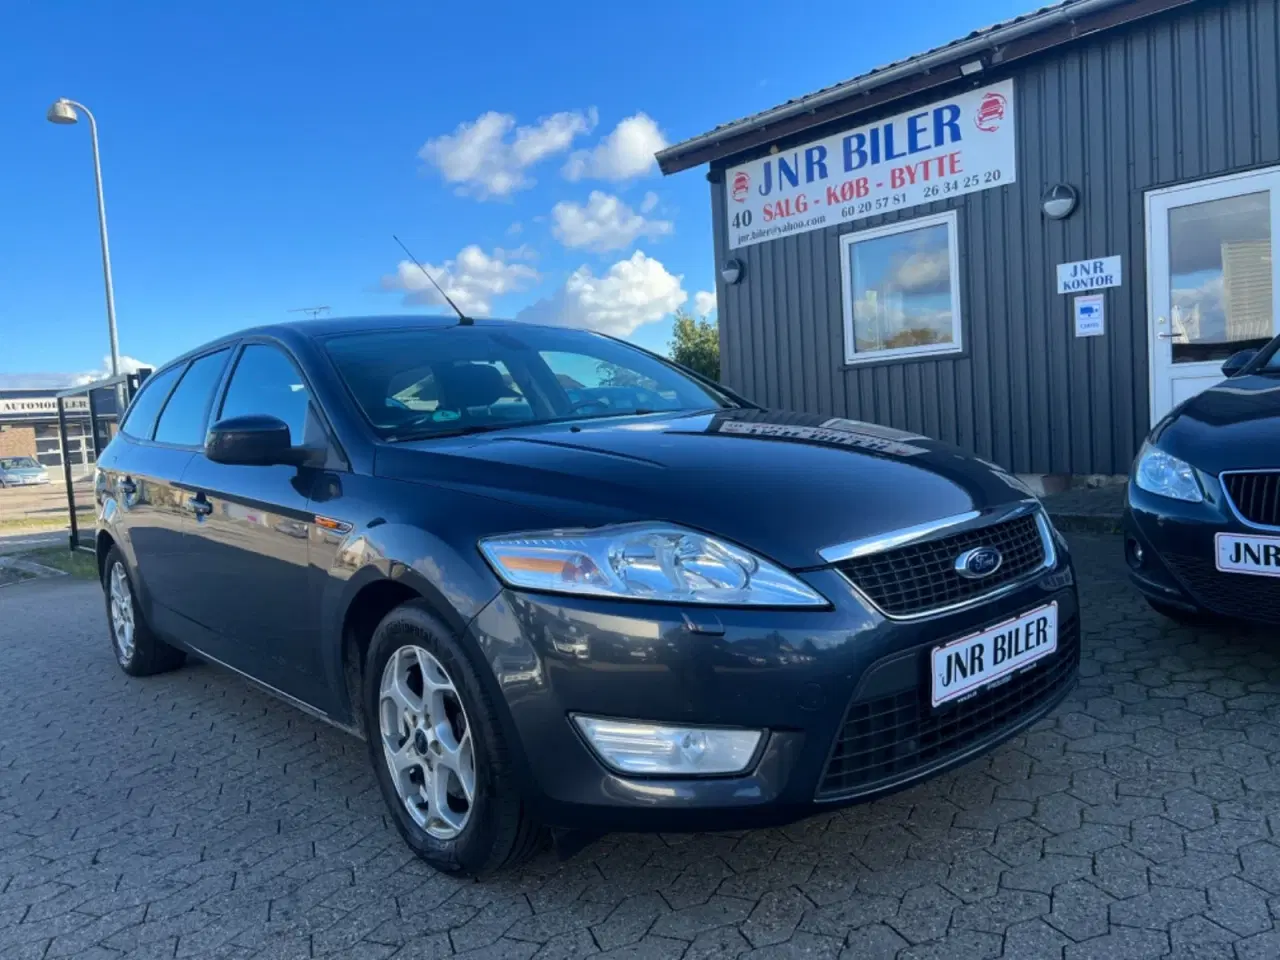 Billede 1 - Ford Mondeo 2,0 TDCi 115 Collection stc. ECO